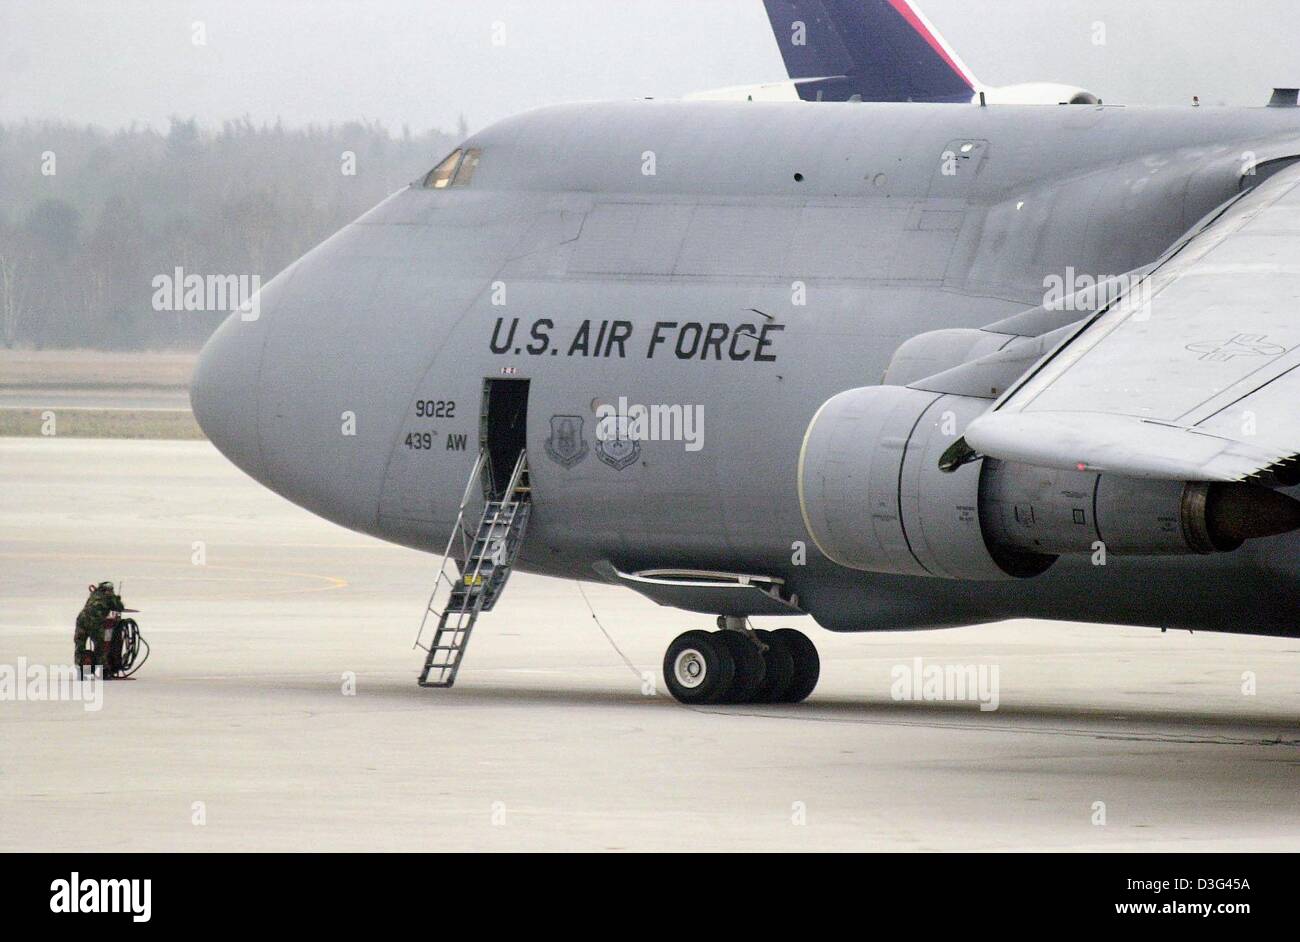 (dpa) - A Galaxy stands on the airfield of the US airbase Ramstein near Landstuhl, western Germany, 10 February 2003. Ramstein is the biggest base of the US air force outside the United States. It is the home of the 86th airlift wing (transportation squadron) and the headquarter of the US Air Forces Europe. According to the newspaper 'Welt am Sonntag' the US defence ministry has st Stock Photo